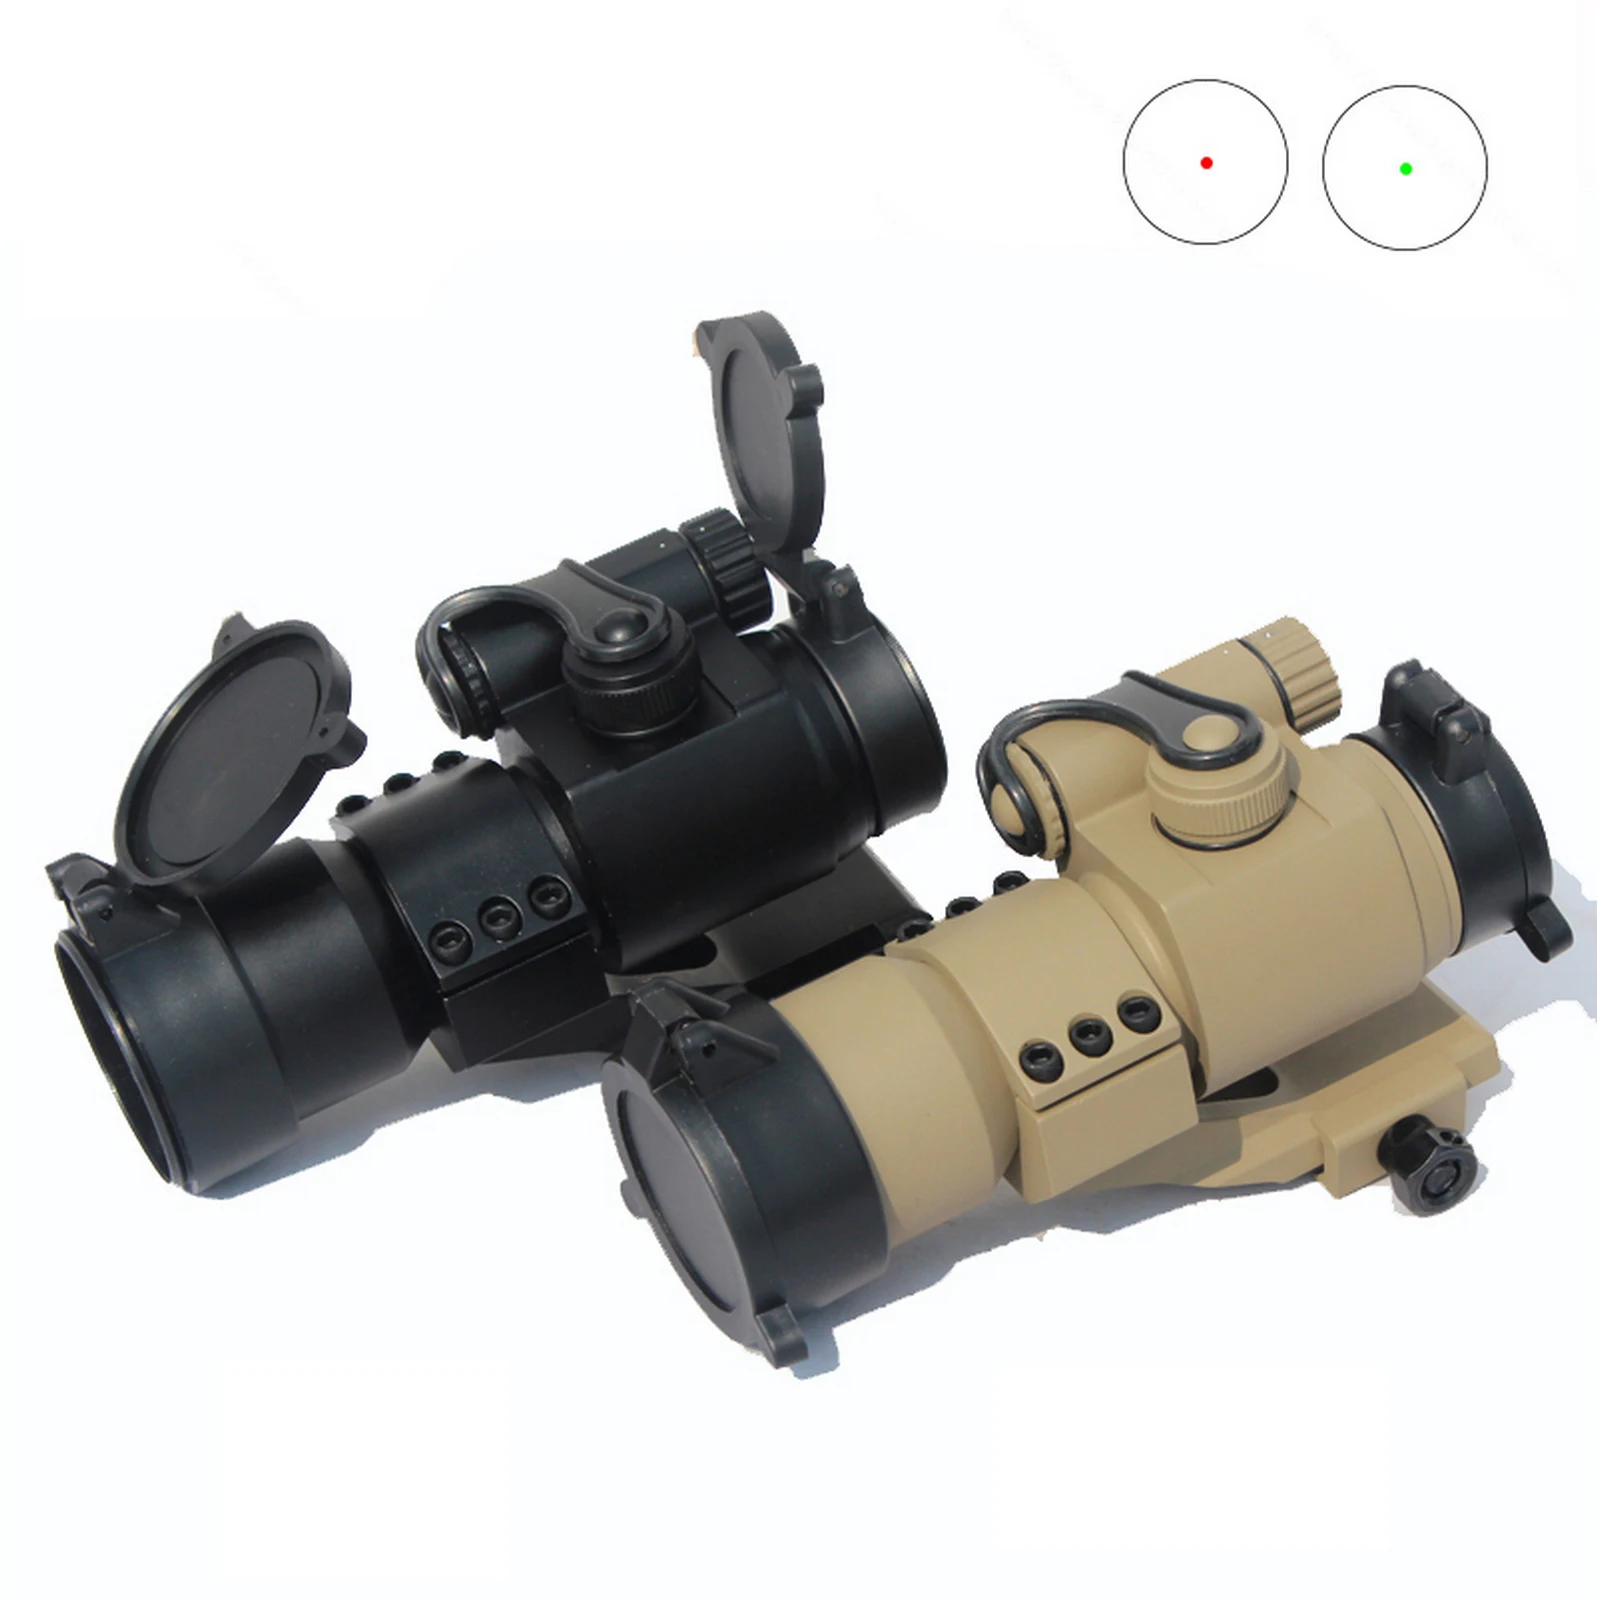 

Tactical M2 Red Dot sight 32mm Reflex Scope Crosshairs Collimator Sight Rifle Hunting Sighting Telescope For Picatinny Rail